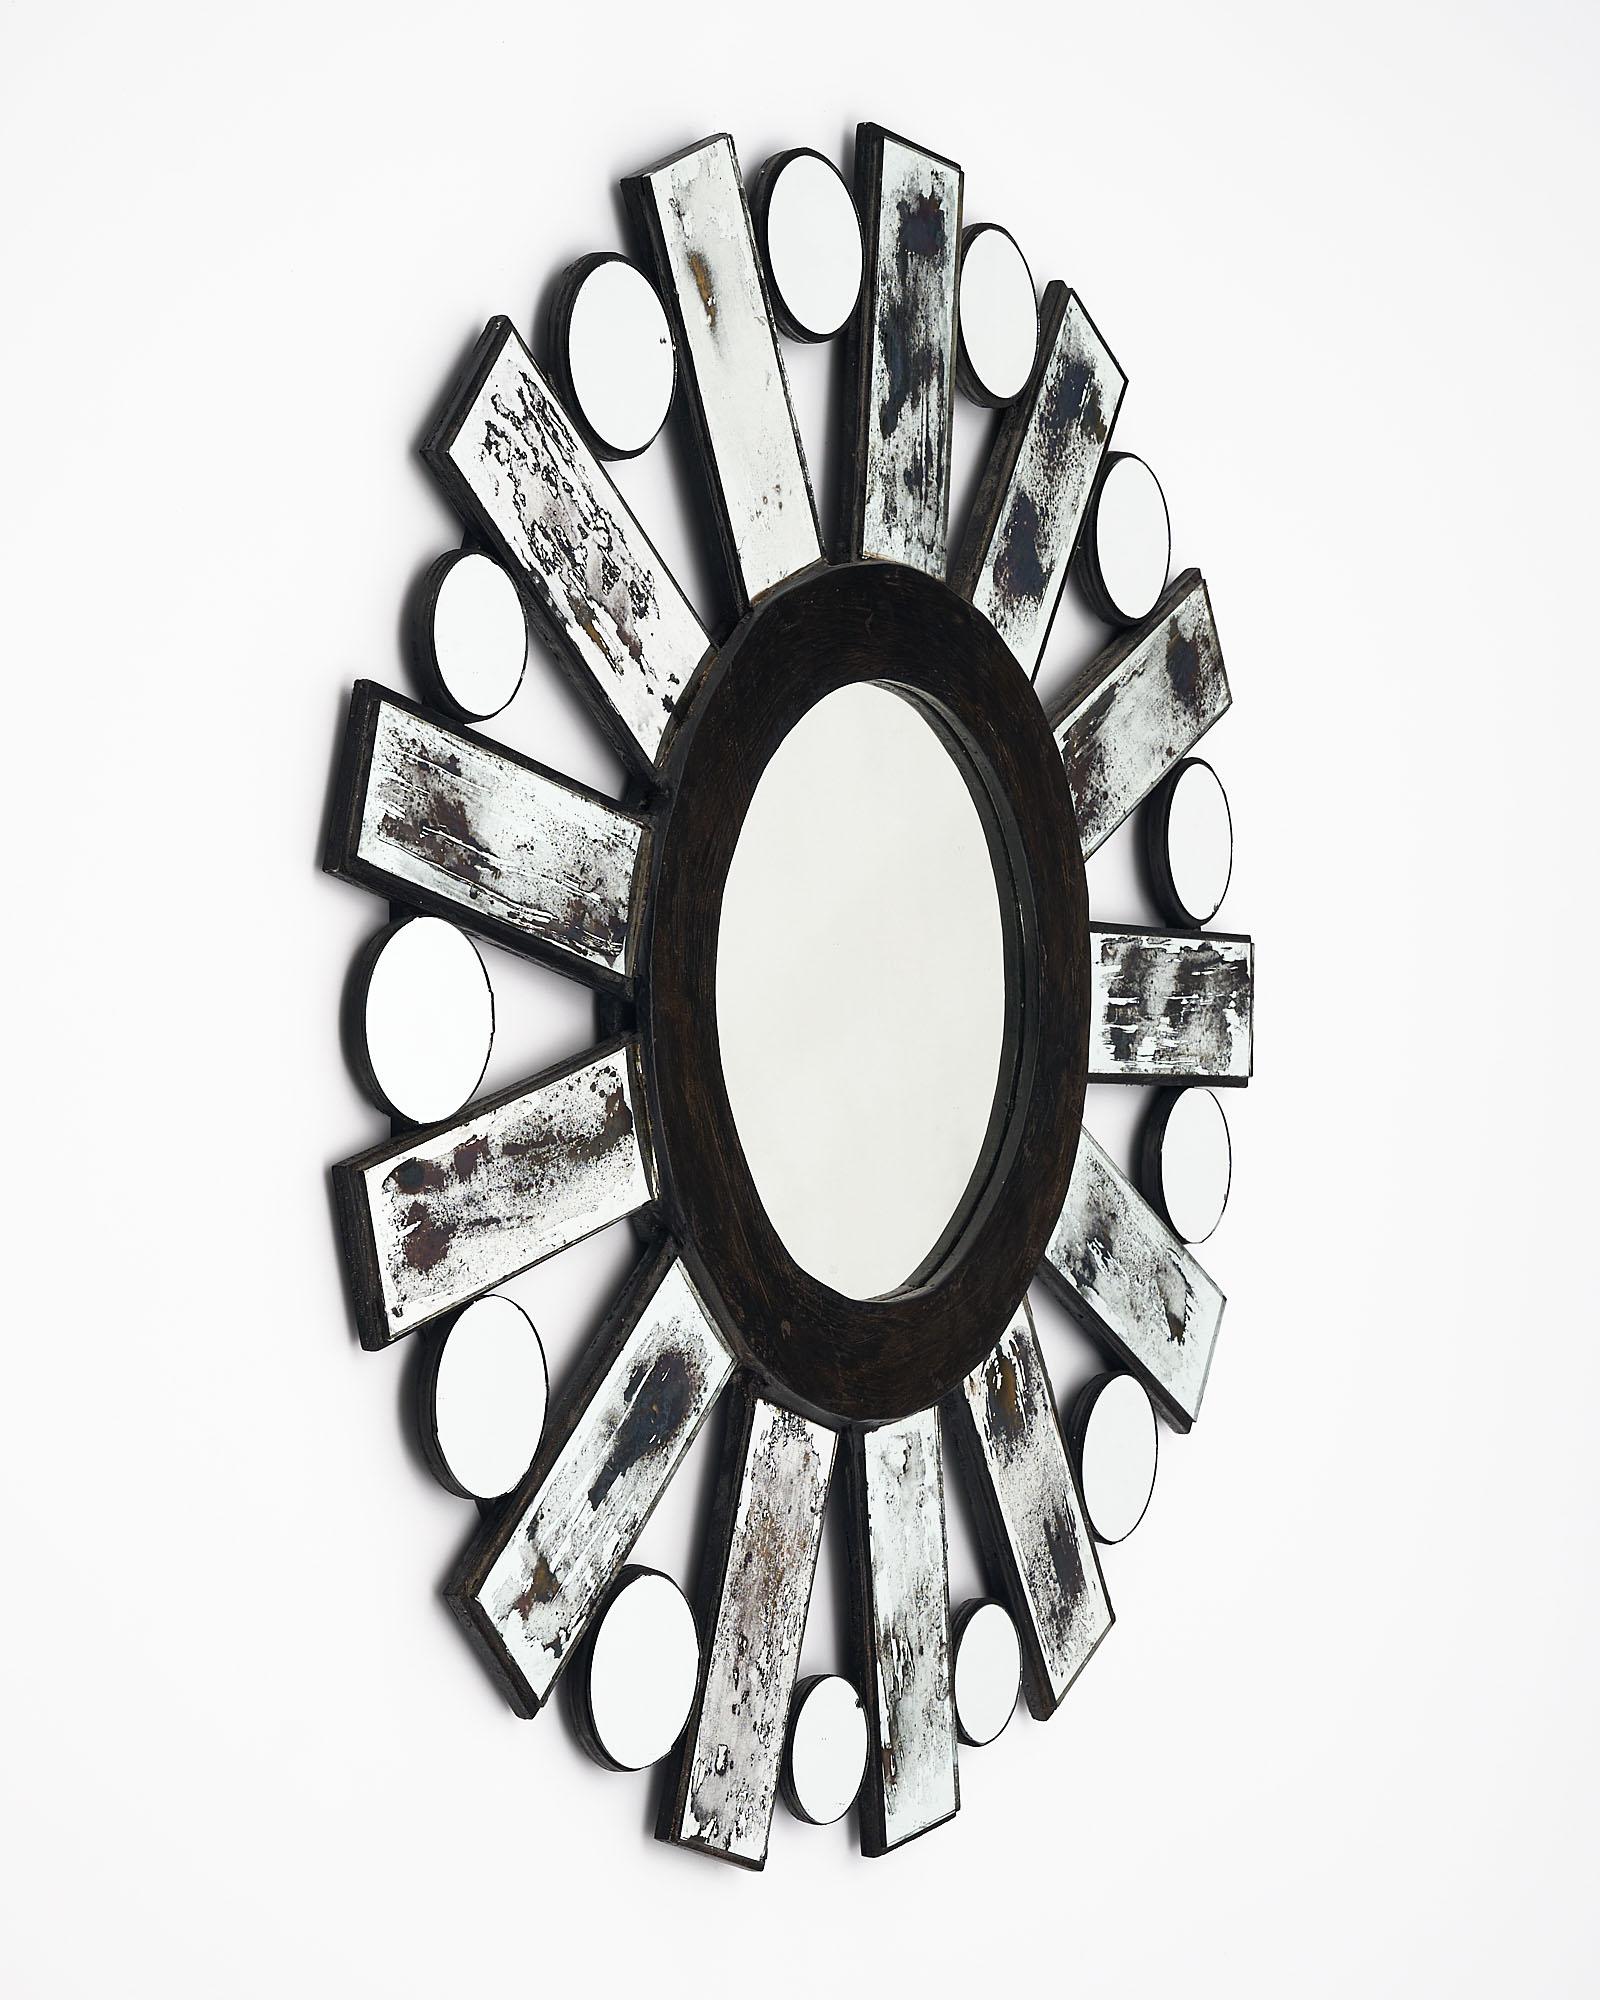 Modernist sunburst mirror with a wooden structure and antiqued mirrored rays. Between each ray is a spheric mirror as well, playing off the central circular mirror. We love the stylized look of this striking piece.